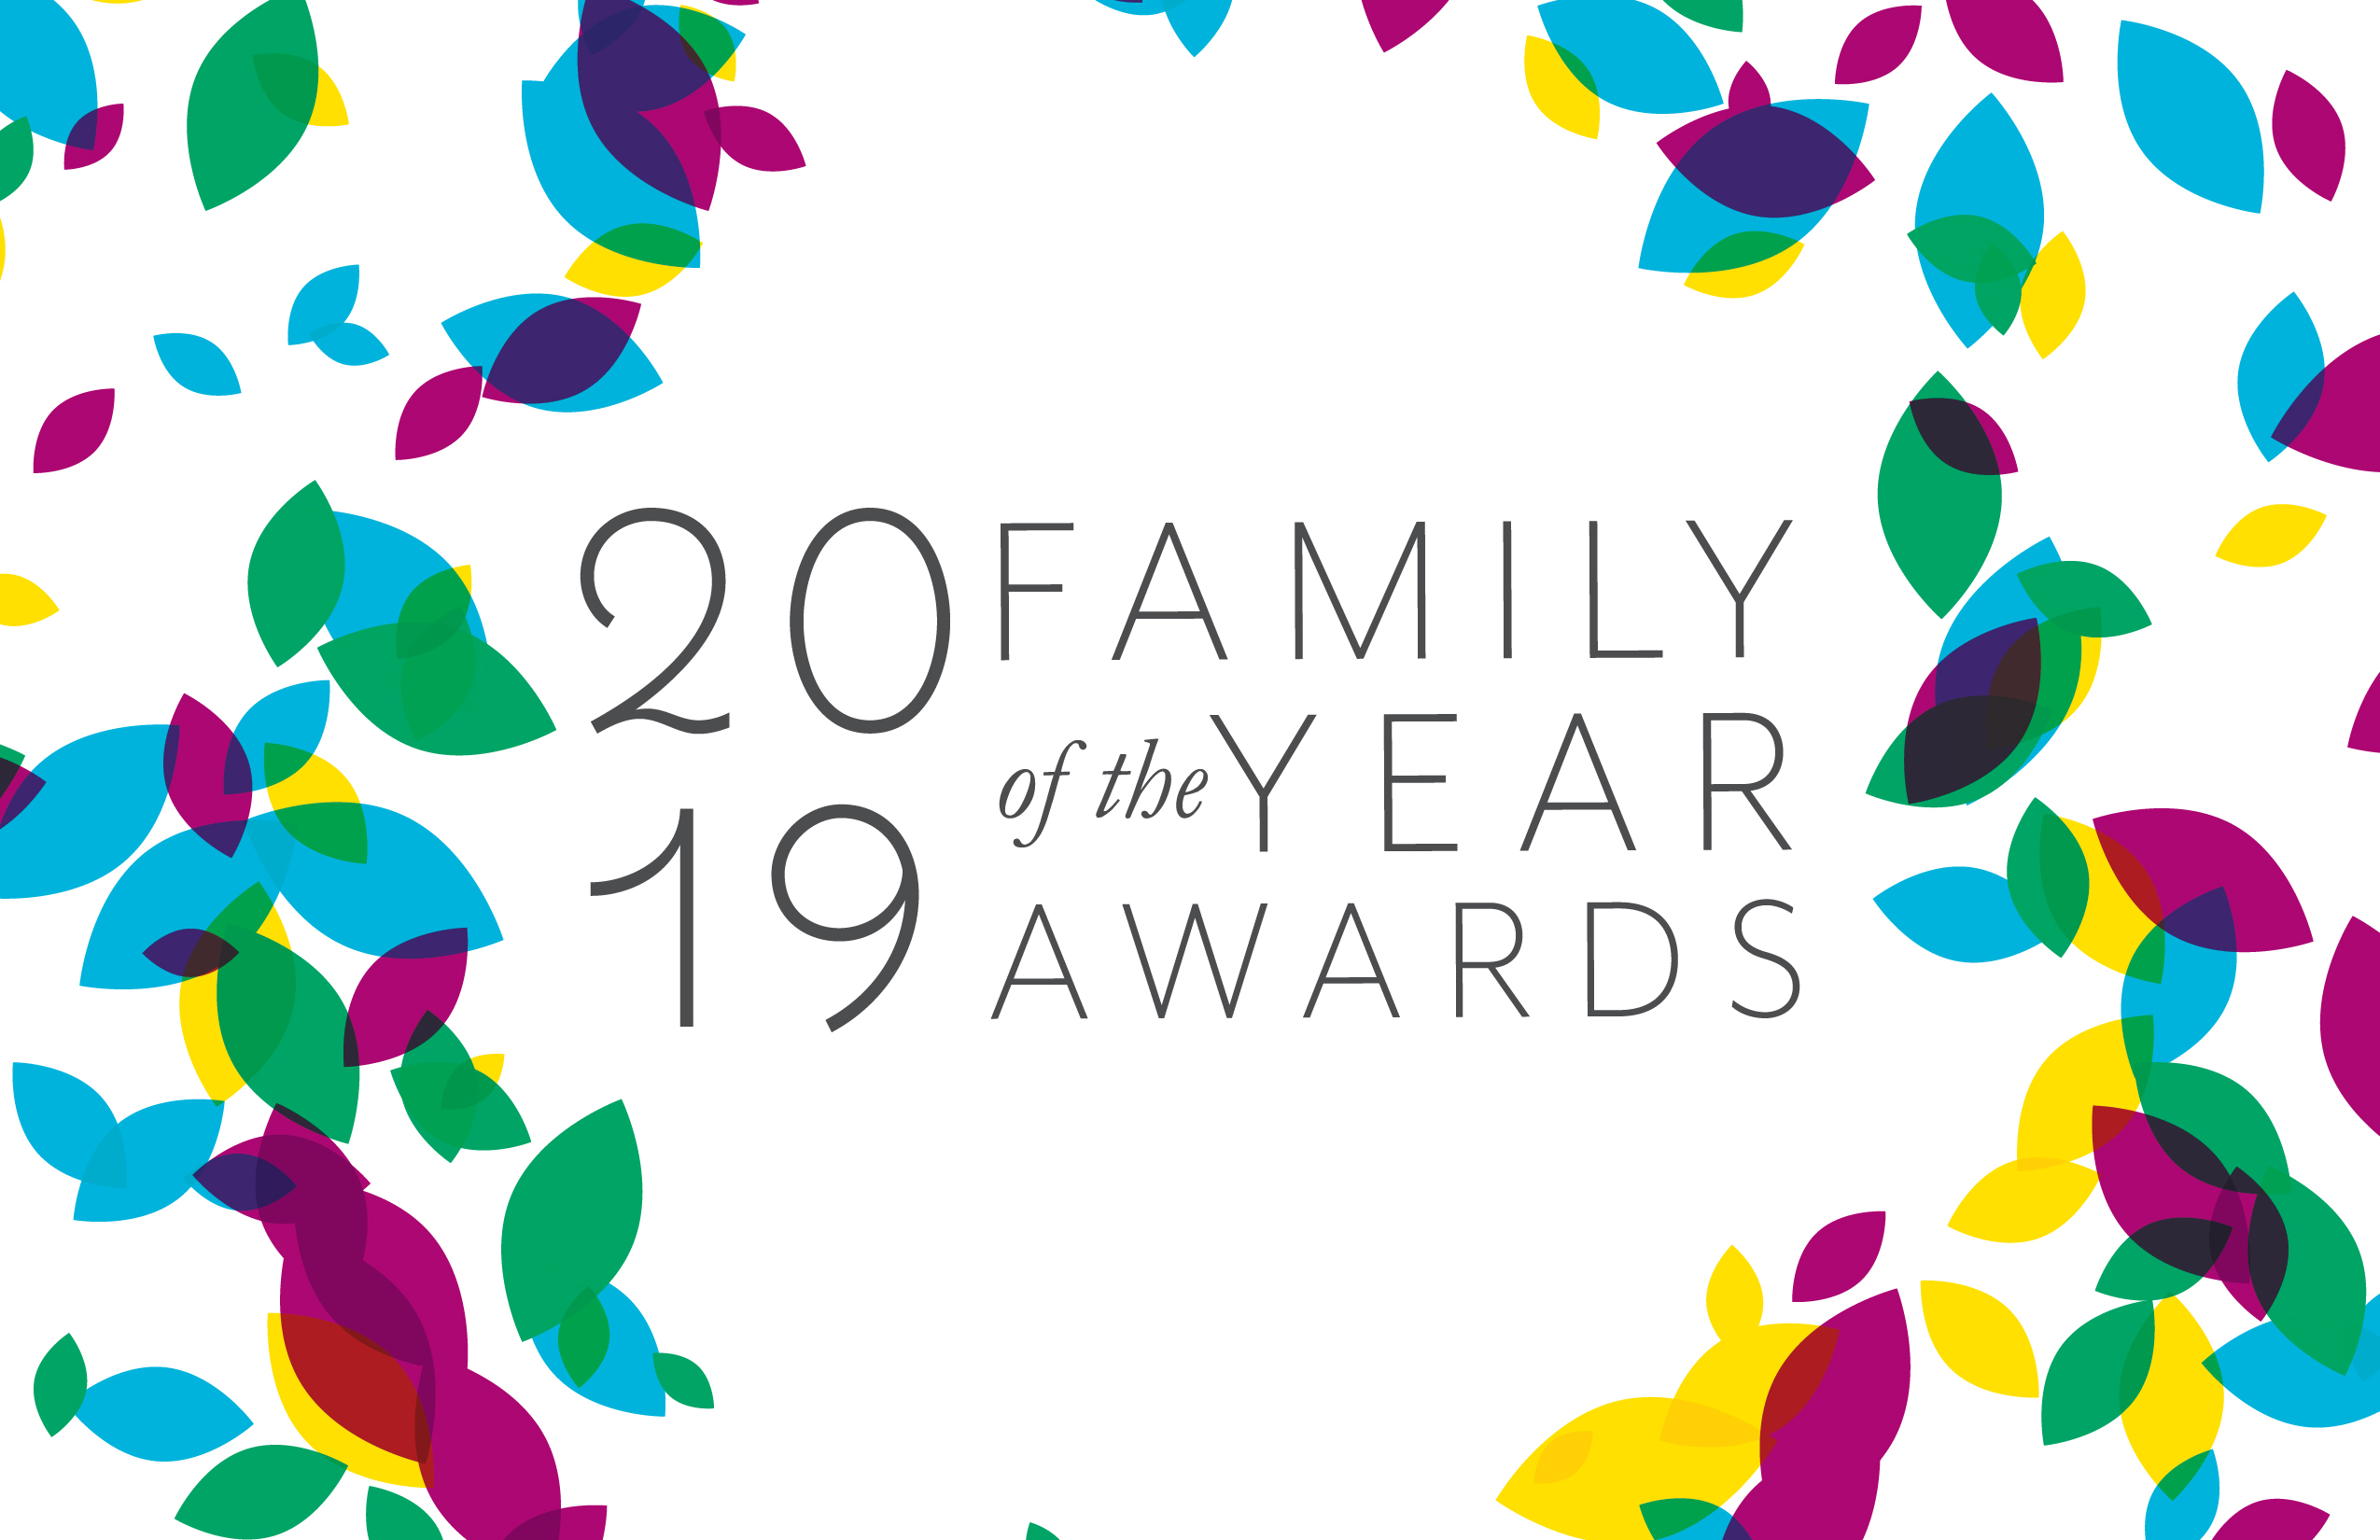 2019 Family of the Year Awards